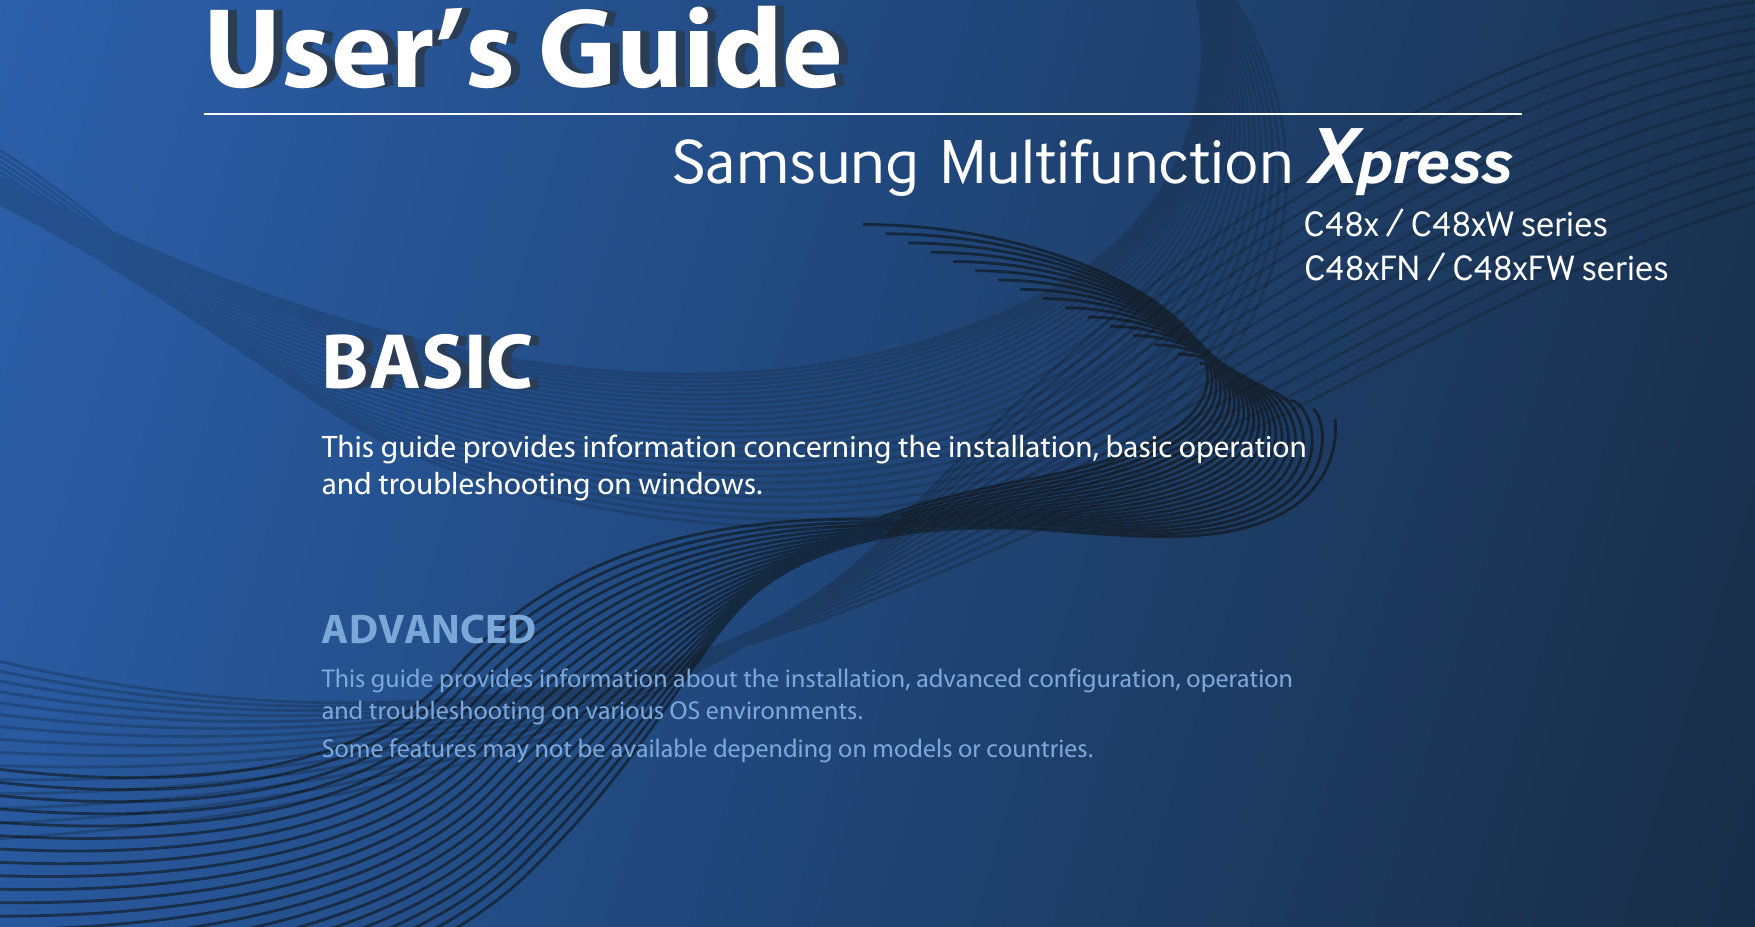 Samsung  Multifunction Xpress                                                                                                                                                                                                                C48x / C48xW series                                                                                                   C48xFN / C48xFW series         BASICUser’s GuideBASICUser’s GuideThis guide provides information concerning the installation, basic operation and troubleshooting on windows.ADVANCEDThis guide provides information about the installation, advanced configuration, operation and troubleshooting on various OS environments. Some features may not be available depending on models or countries.